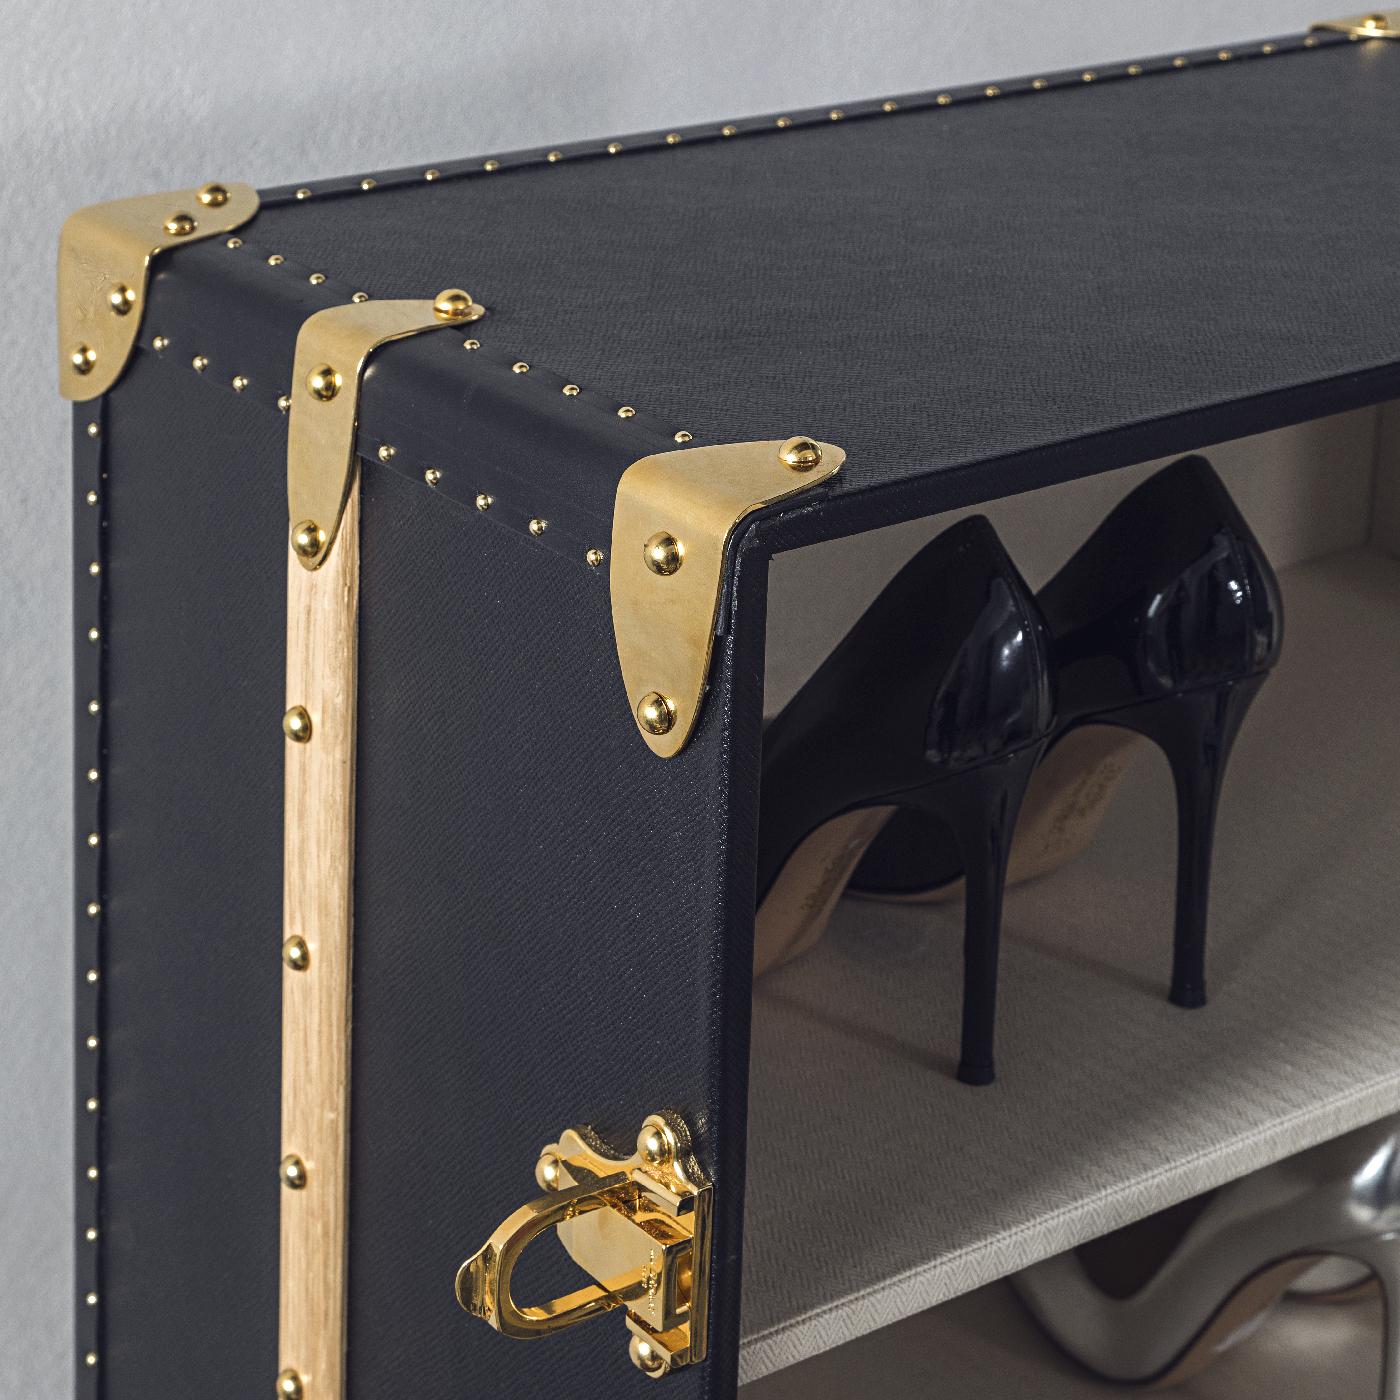 This stunning shoe trunk is the perfect way to transport and store shoes and protecting them, while also adding a unique mix of old-fashioned charm and modern allure. With four shelves on each side, this sophisticated trunk offers plenty of space